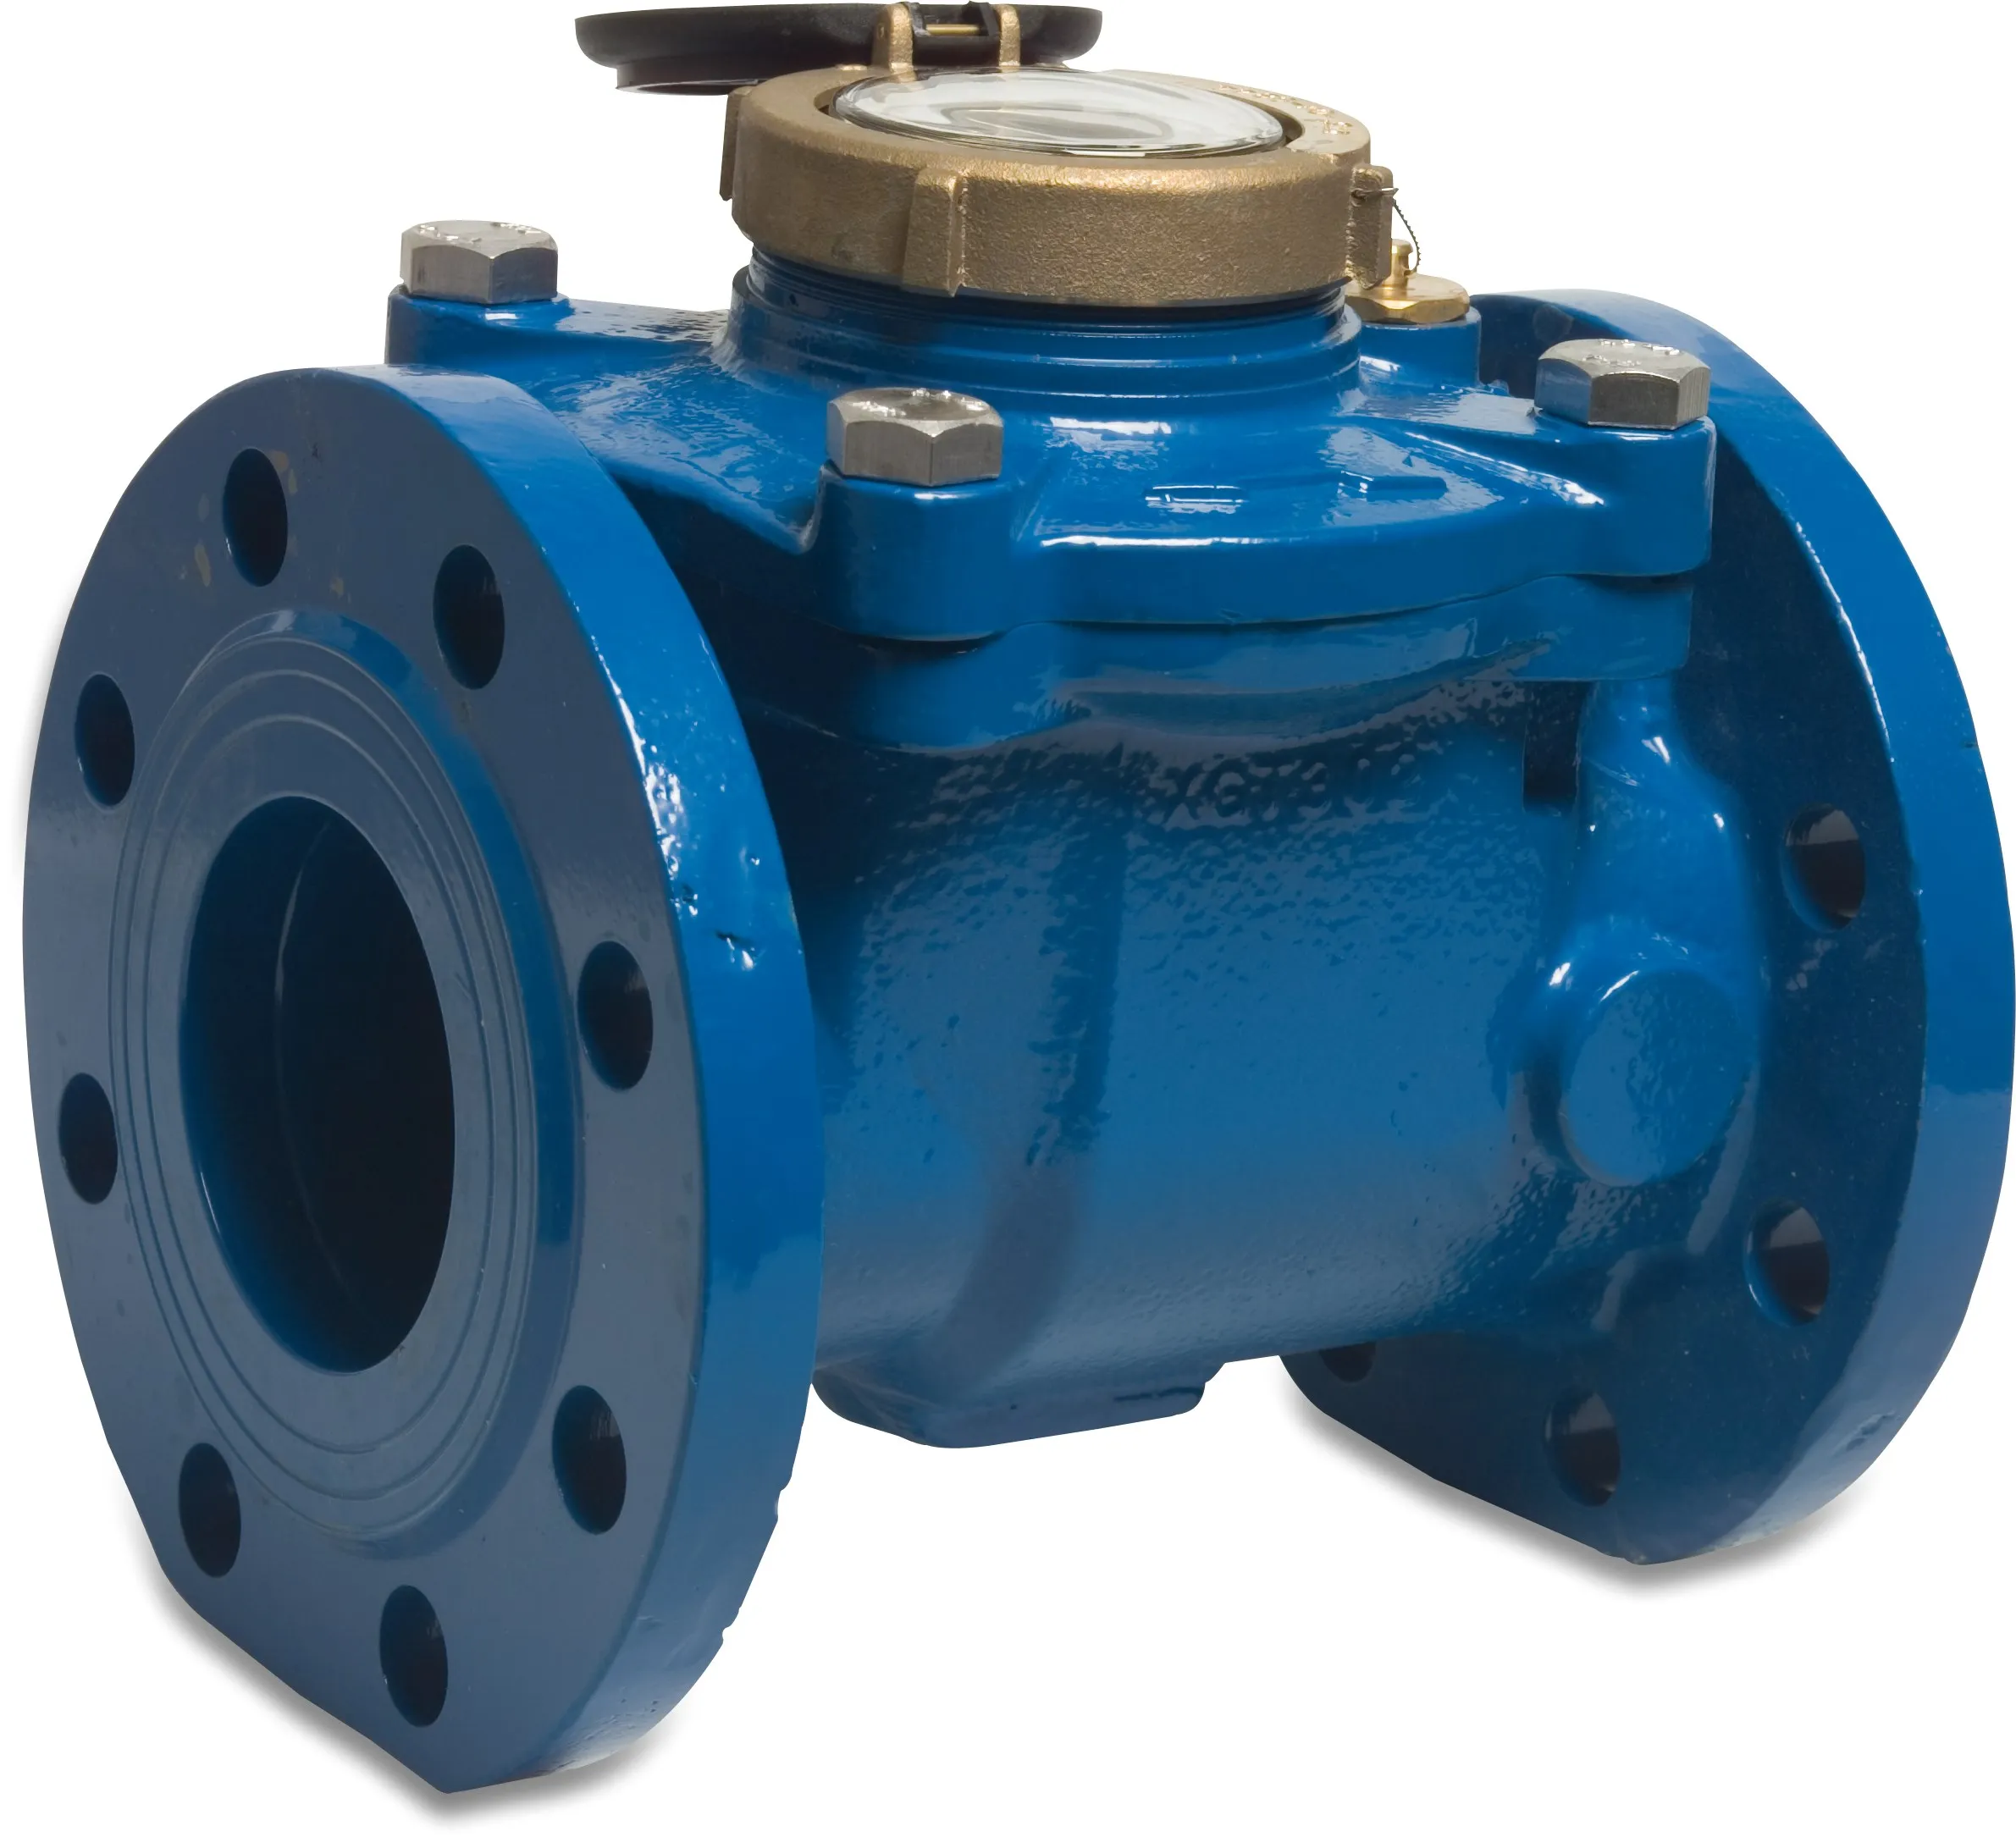 Arad Water meter cast iron polyester coated DN50 DIN flange 16bar 15m³/h blue type Woltman